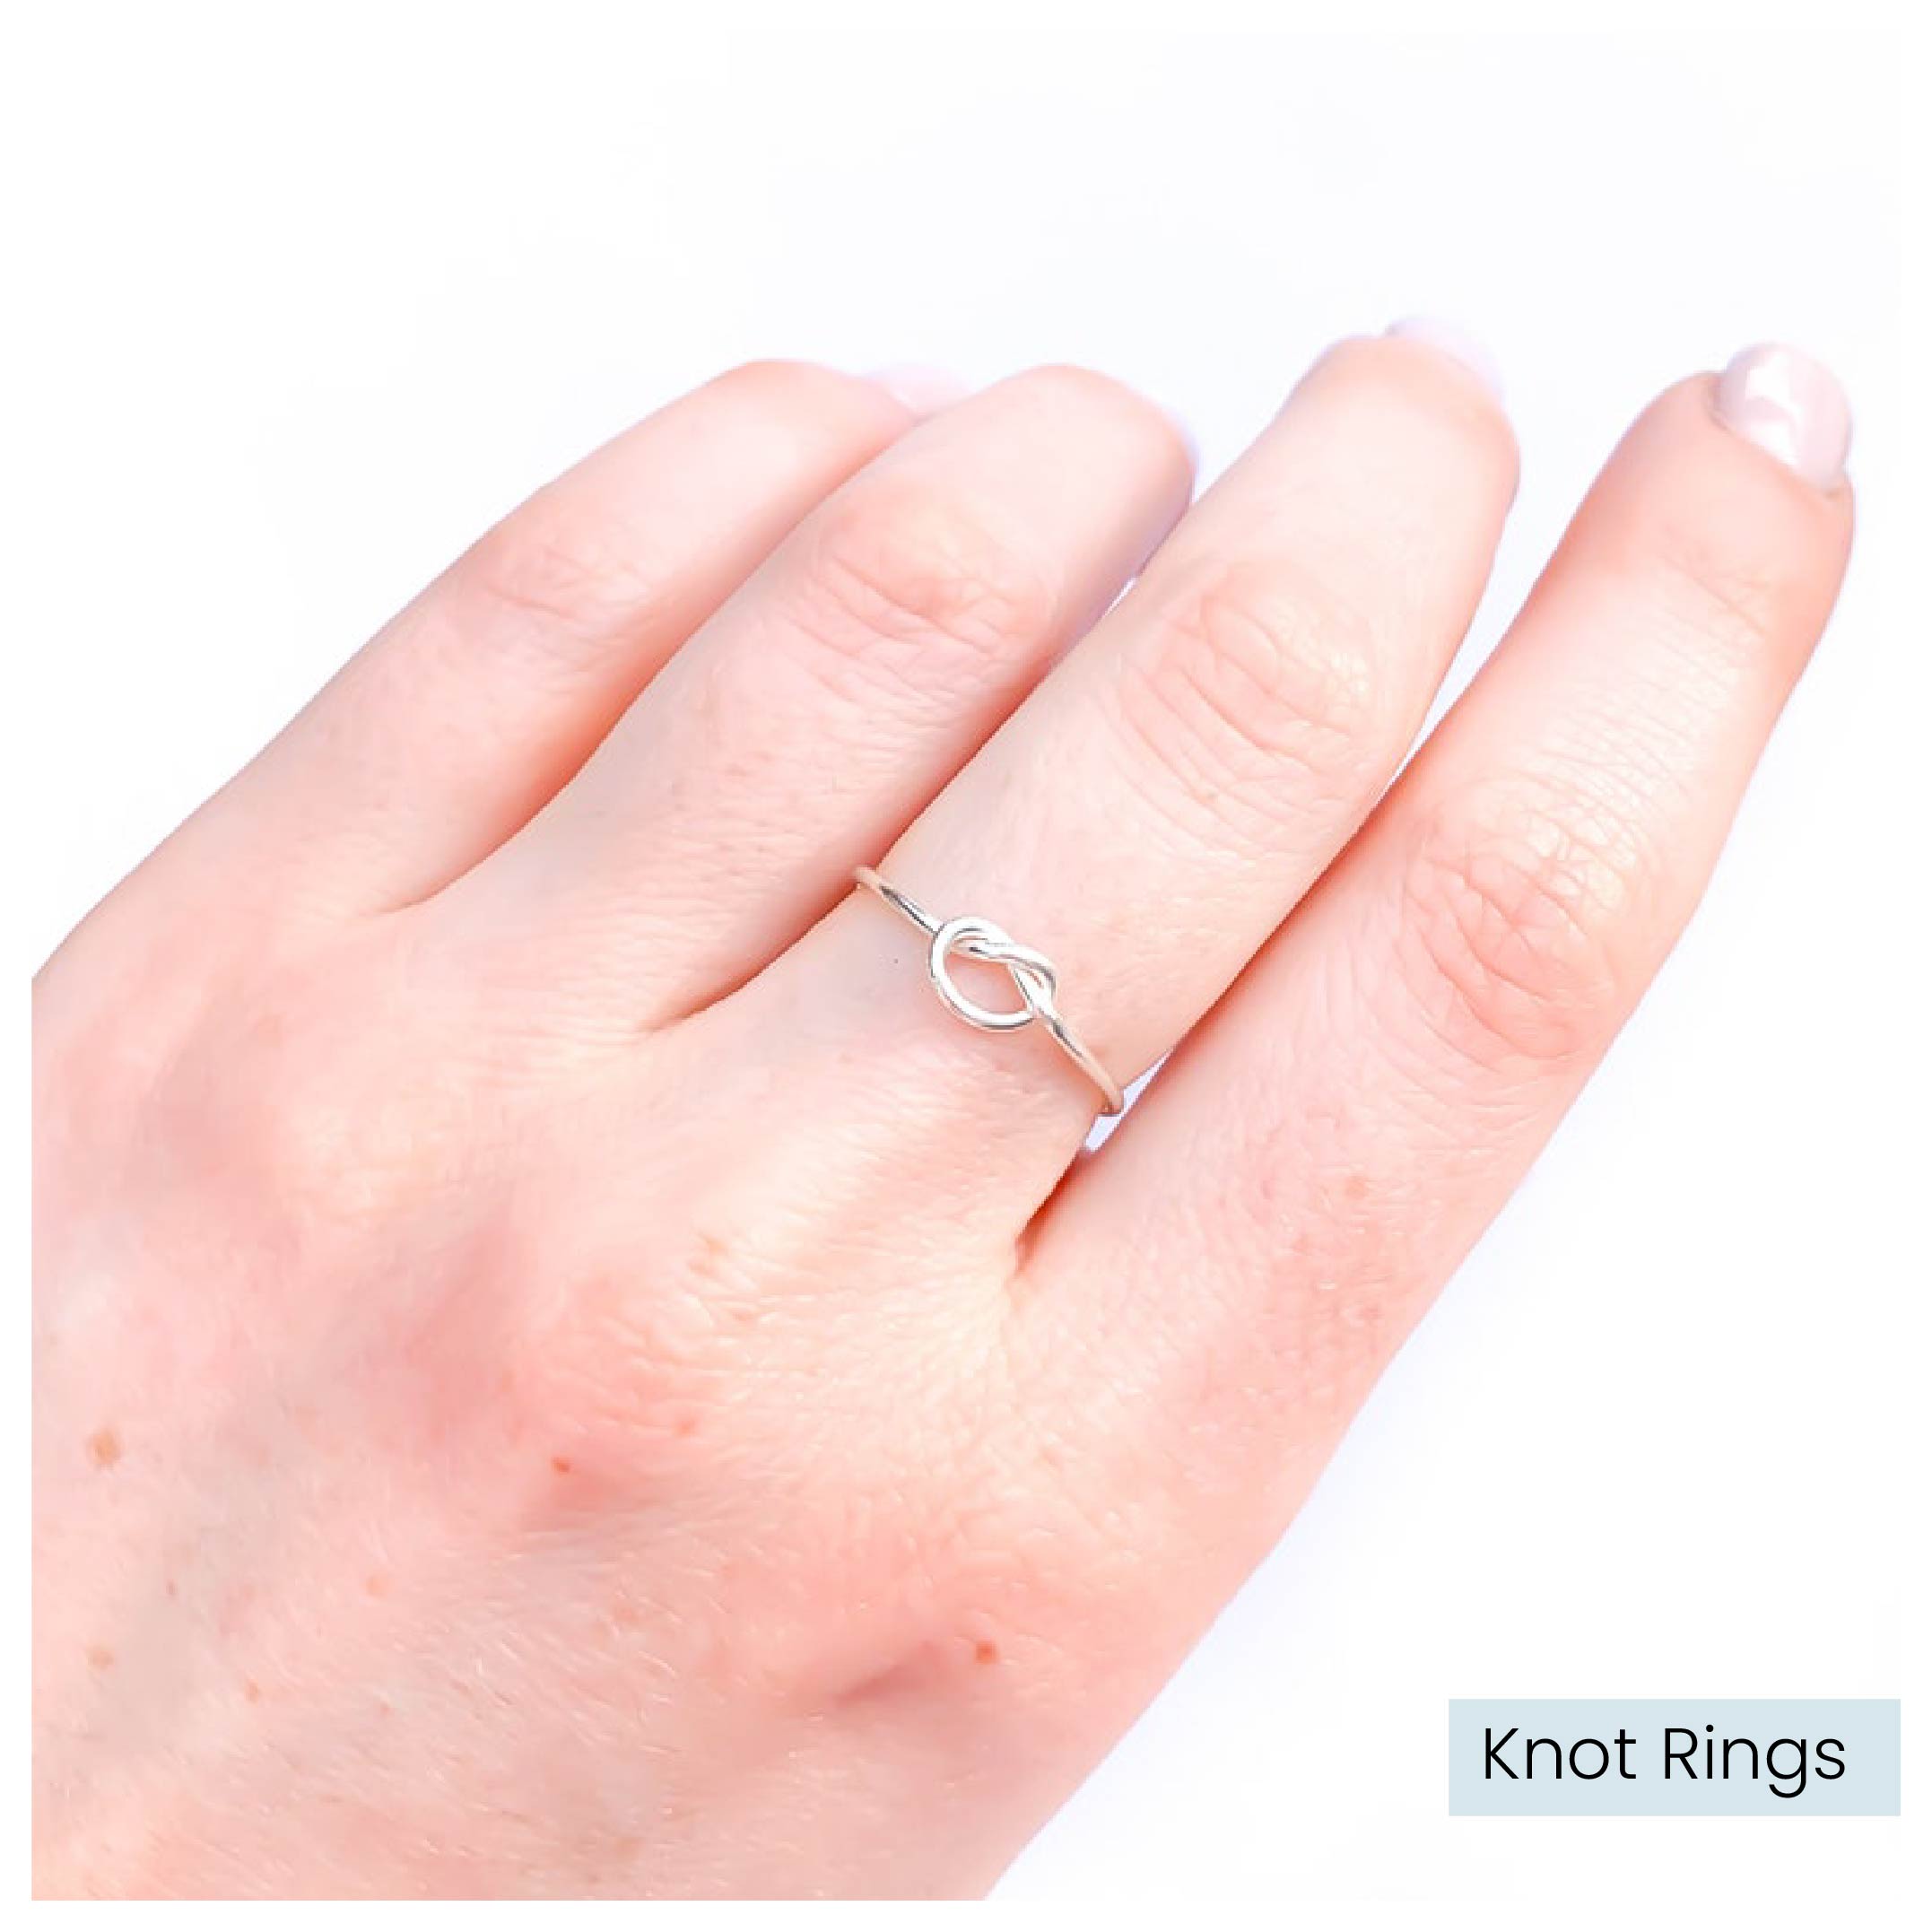 Knot rings